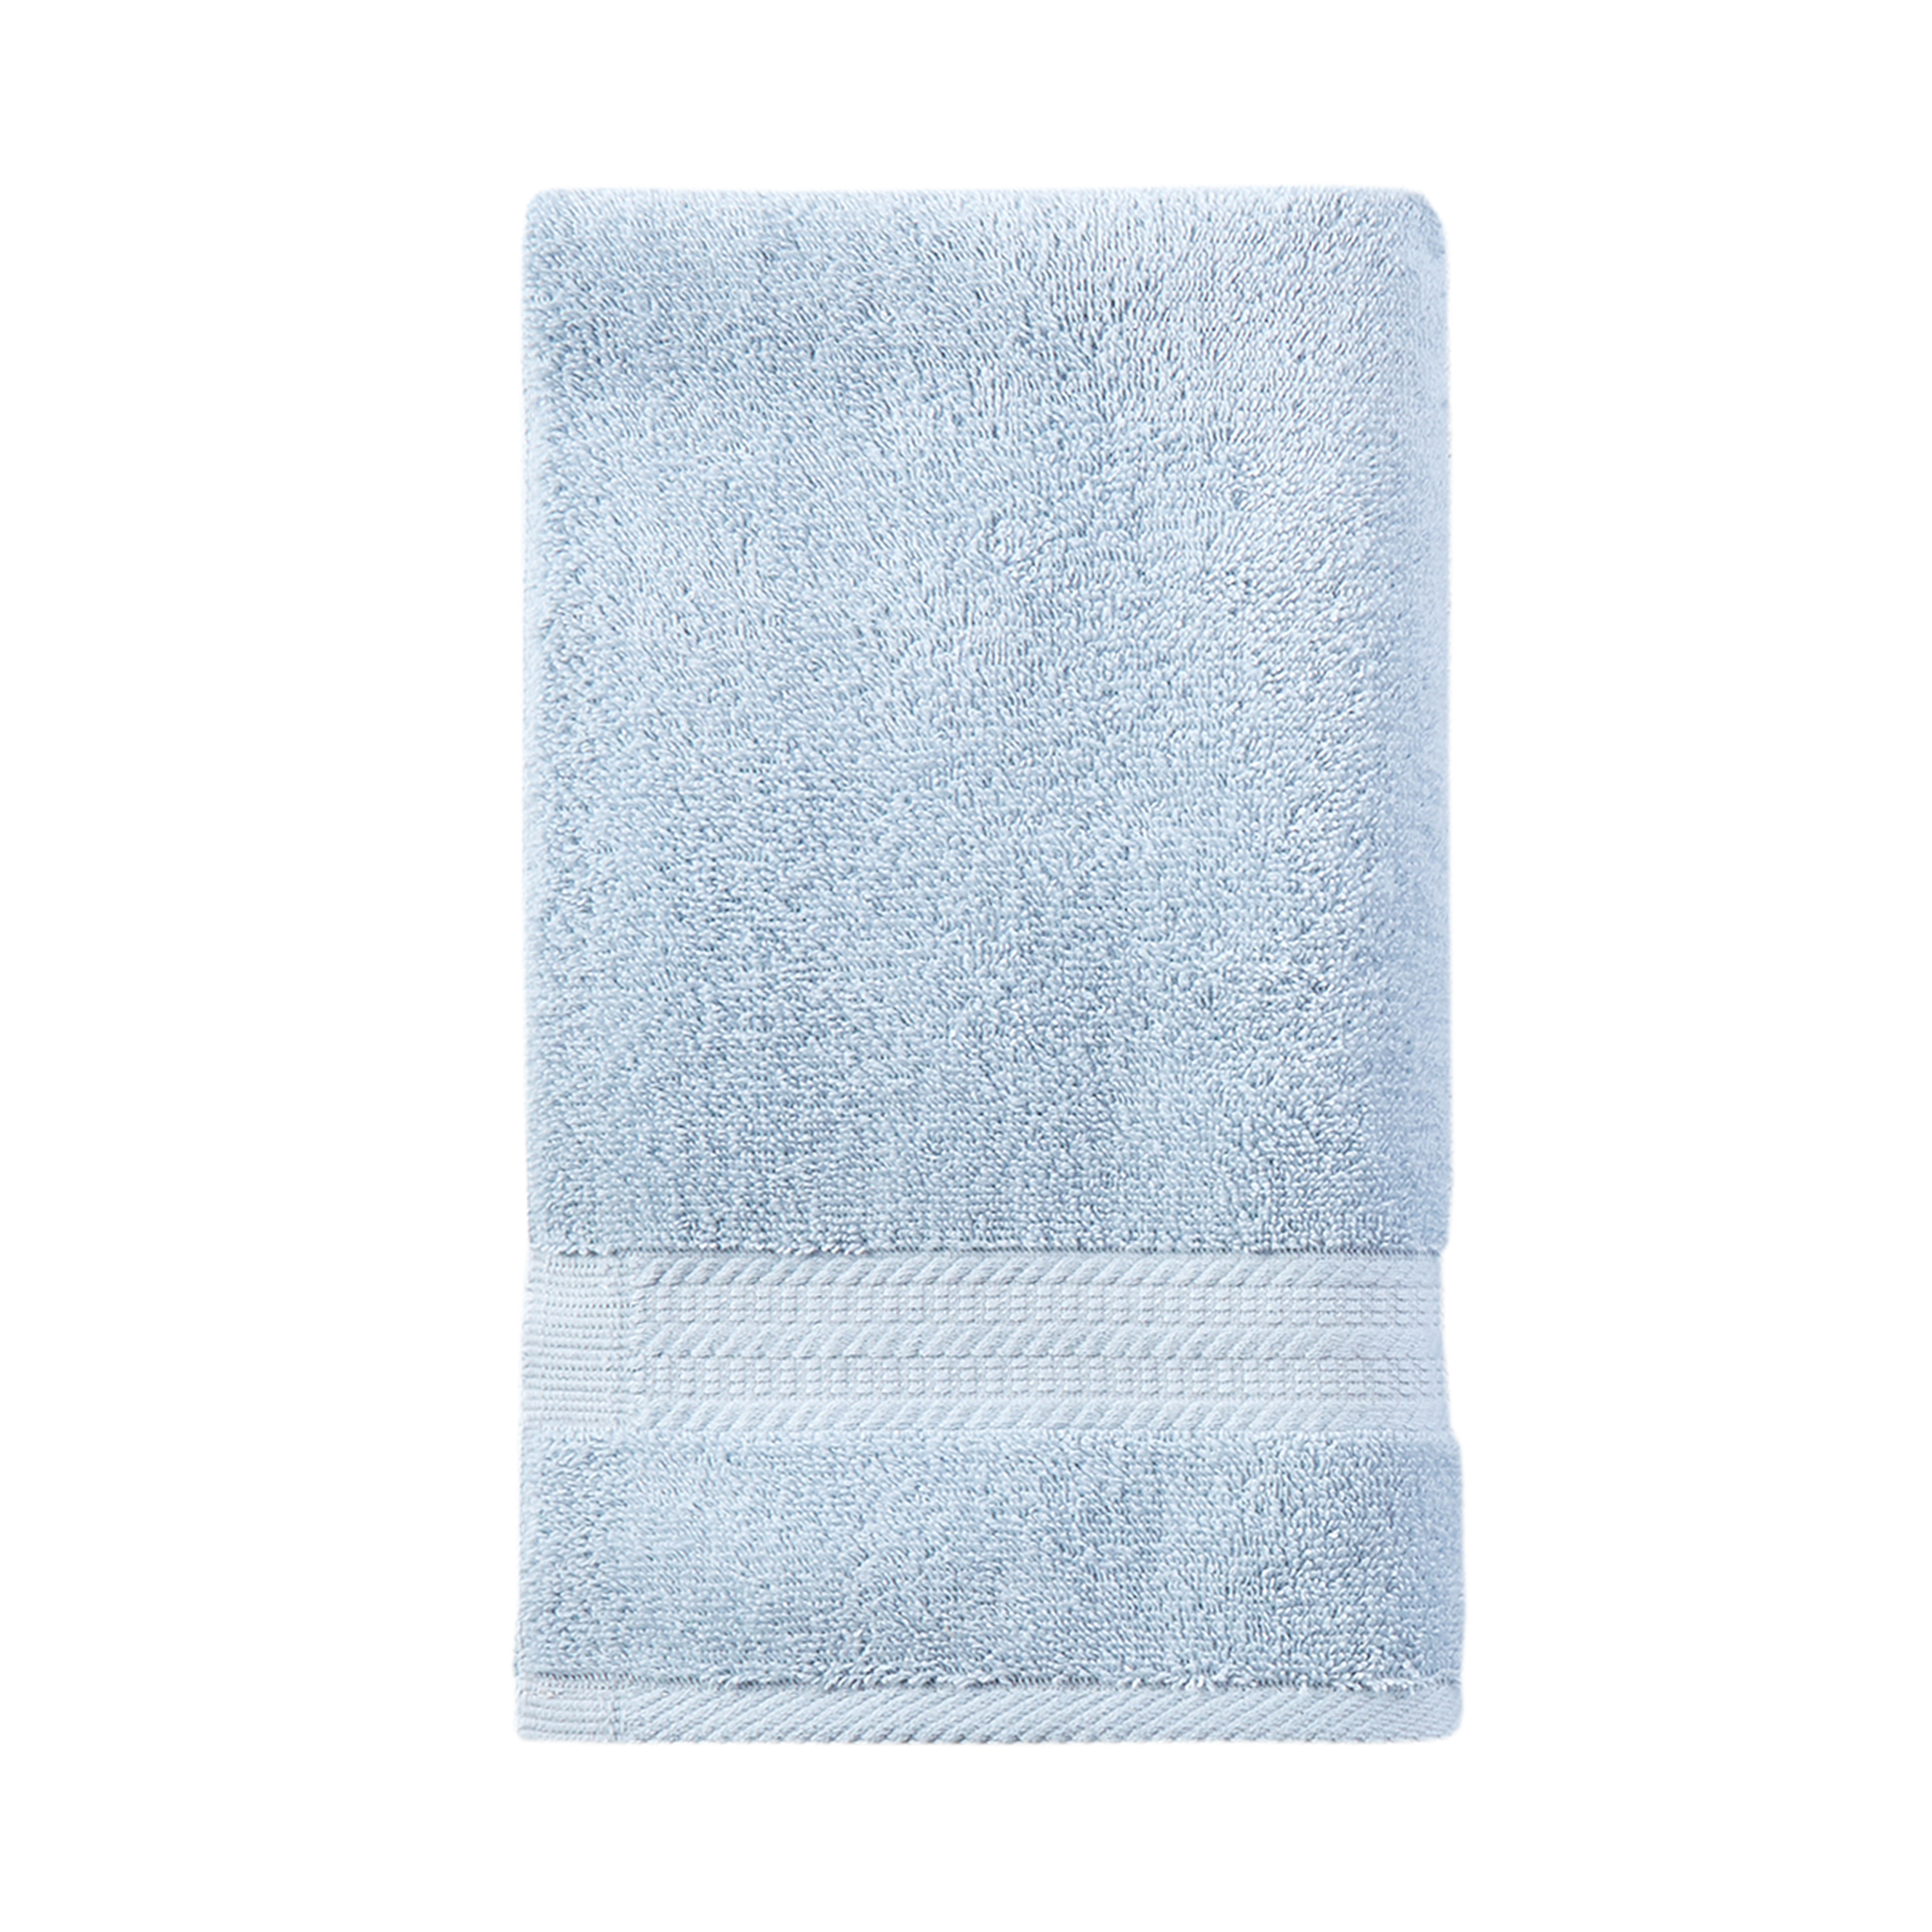 Better Homes & Gardens Hand Towel, Solid Light Blue - image 2 of 7